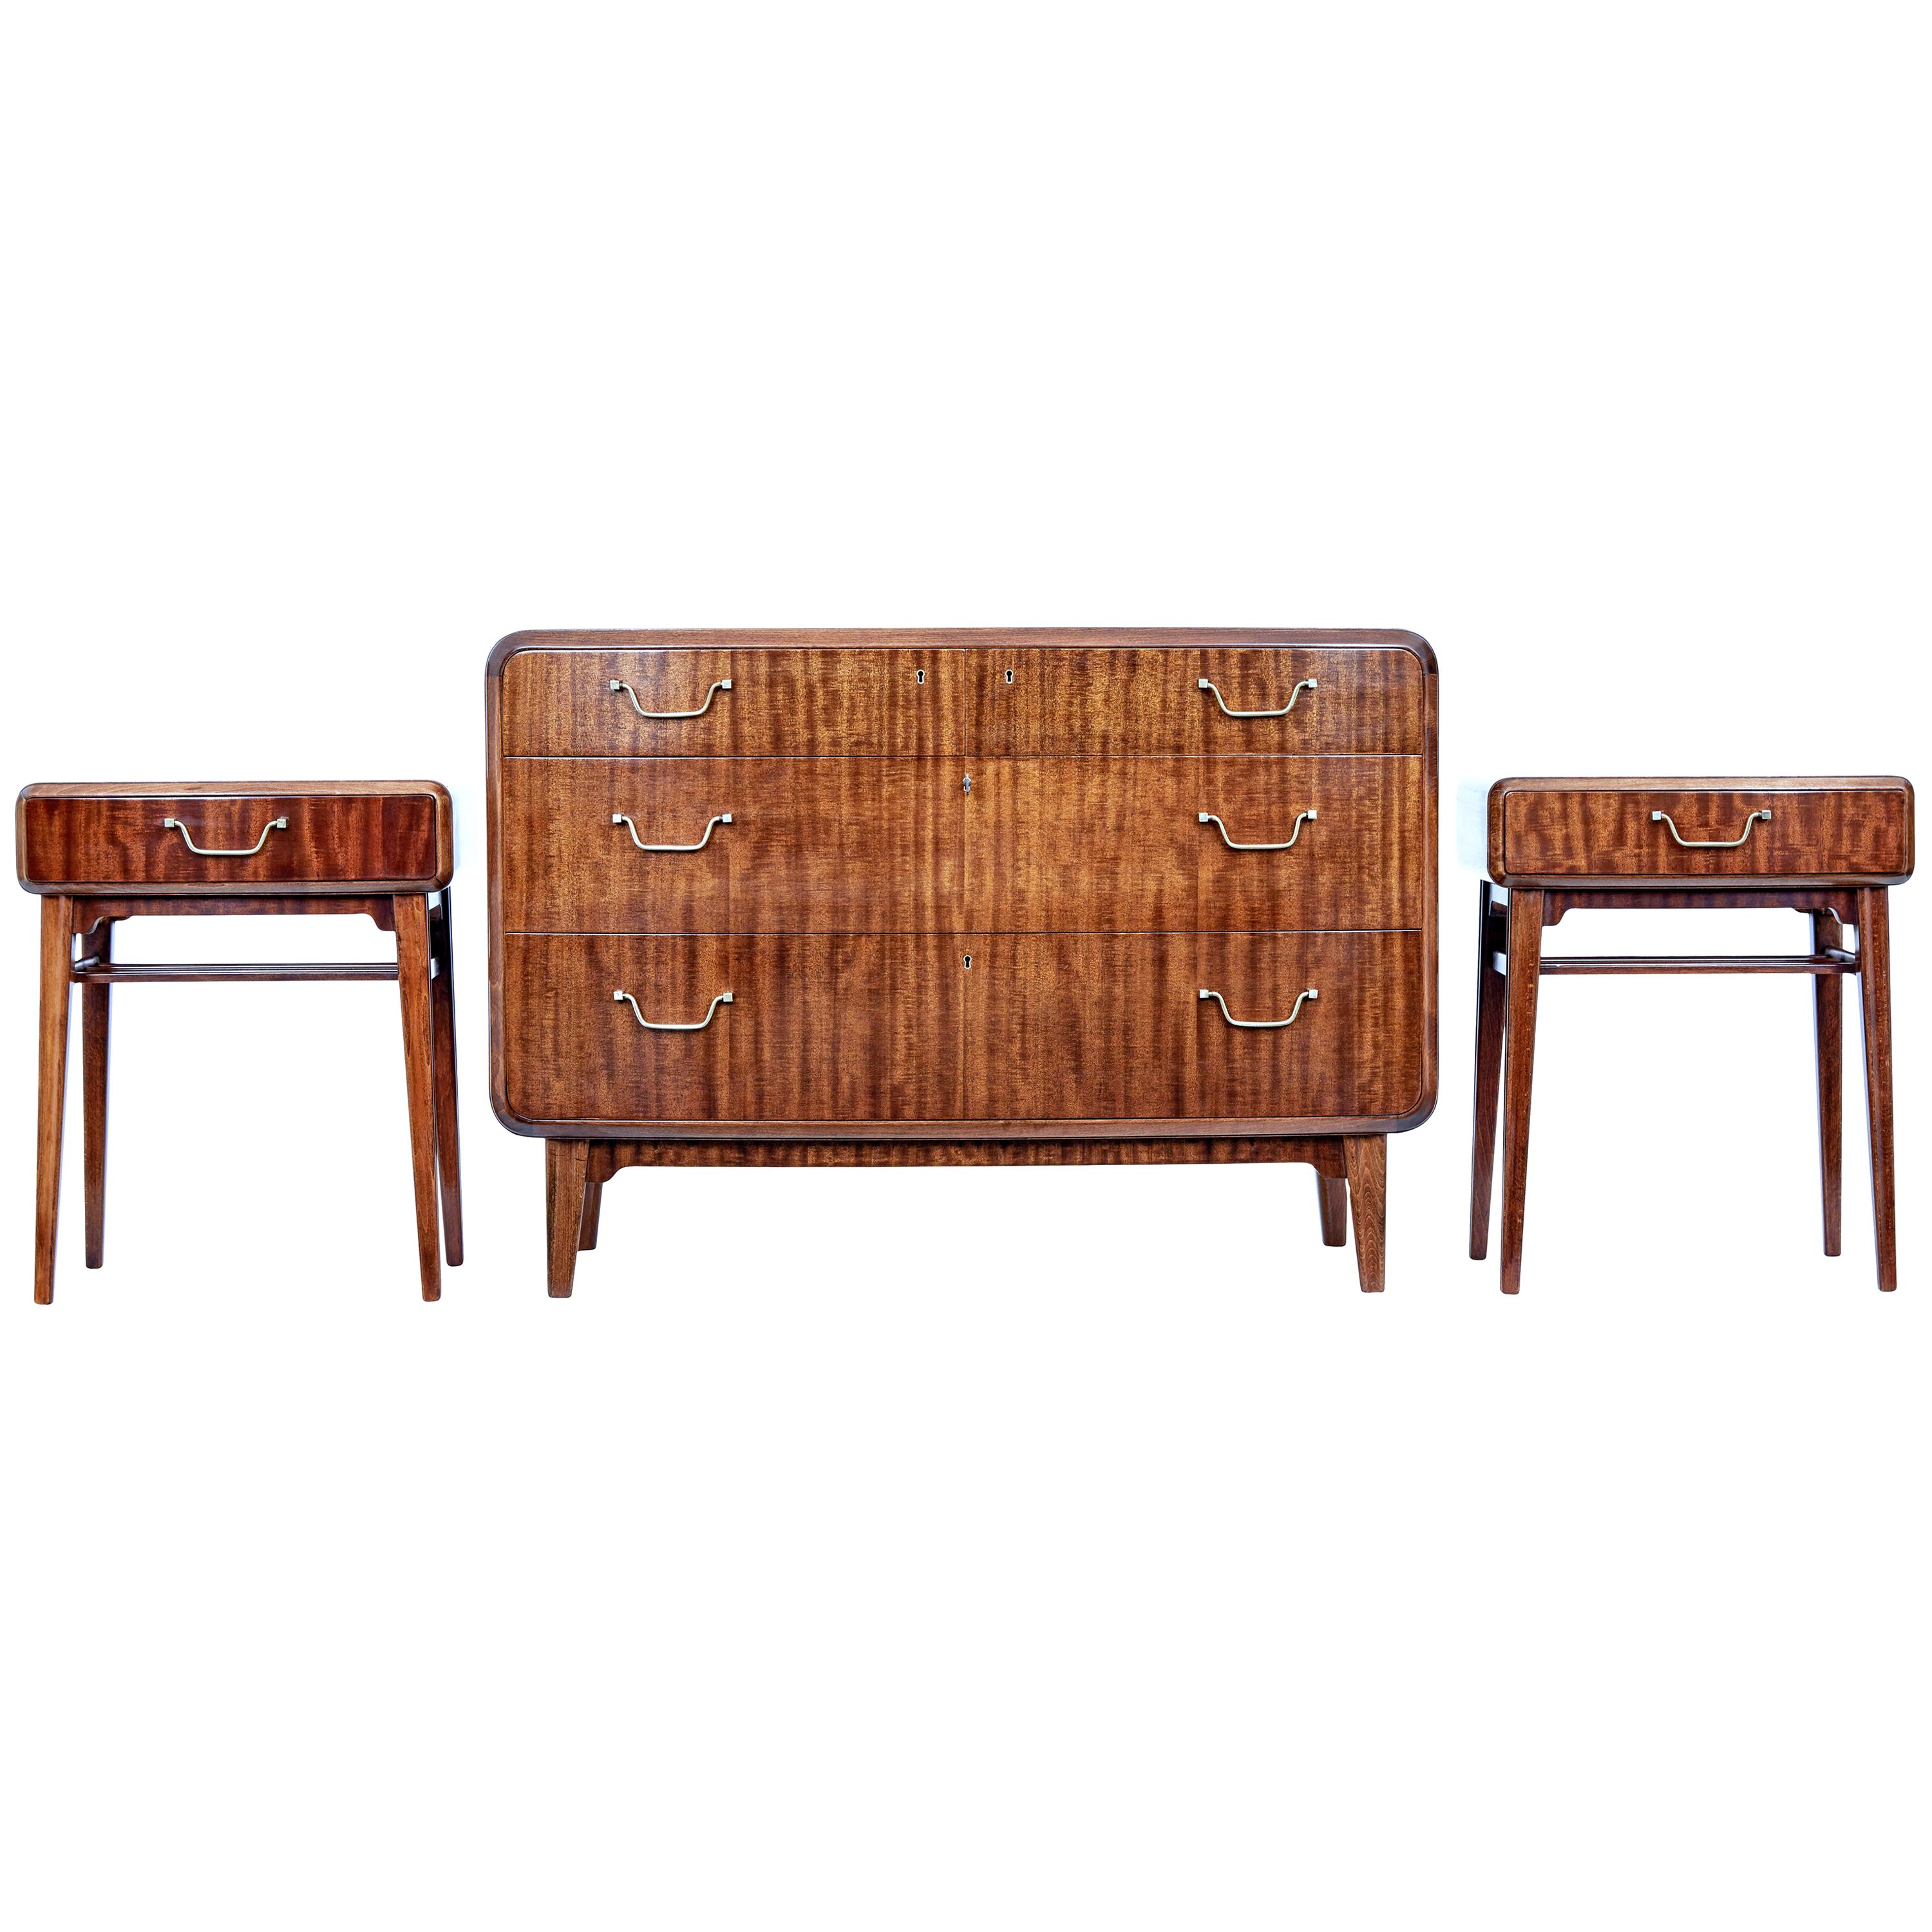 Mid-20th Century Mahogany 3-Piece Bedroom Suite by SMF Bodafors